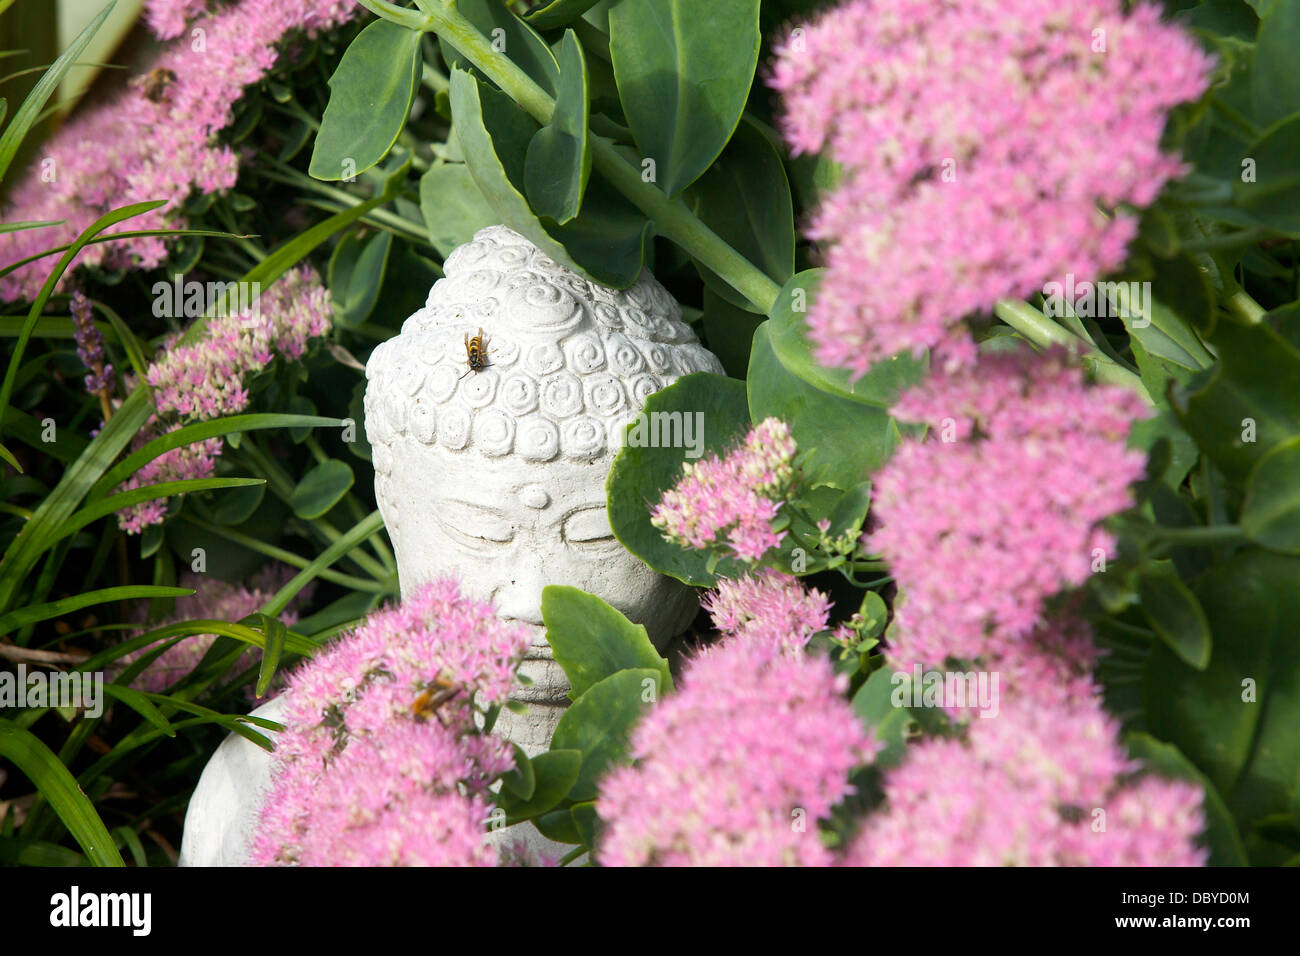 a wasp rests on Buddha's head, surrounded by pink sedum flowers Stock Photo